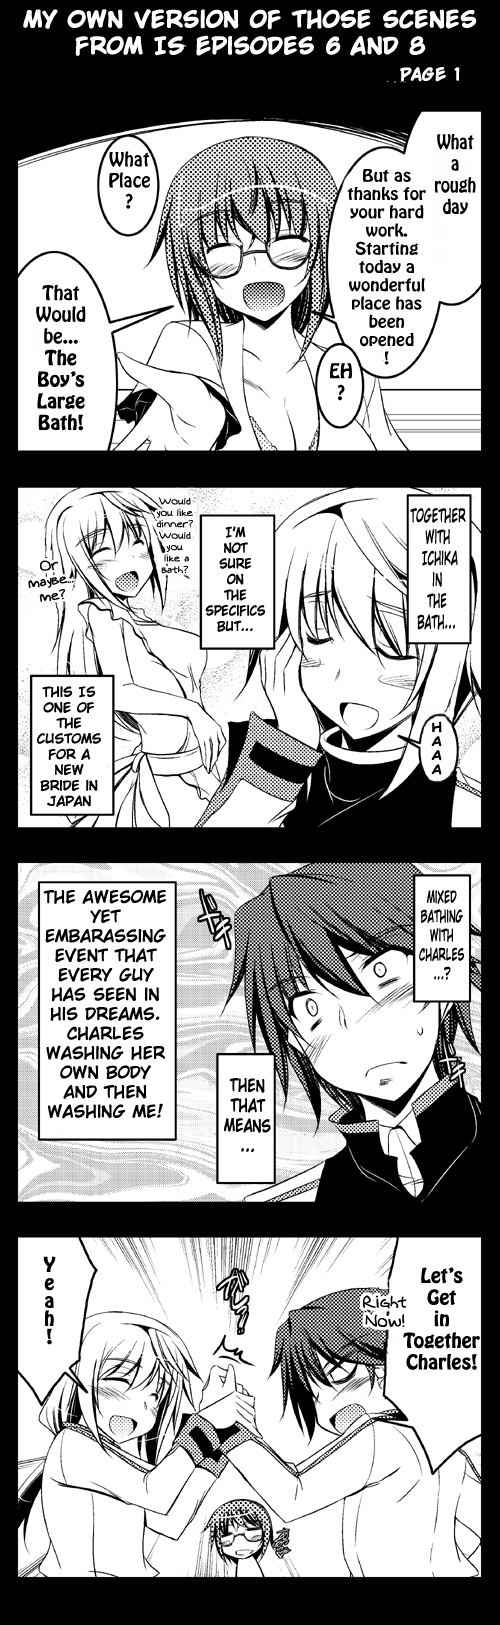 Infinite Stratos If Only ... (Doujinshi) Ch. 2 My own version of that scene in IS episode 6 & 8